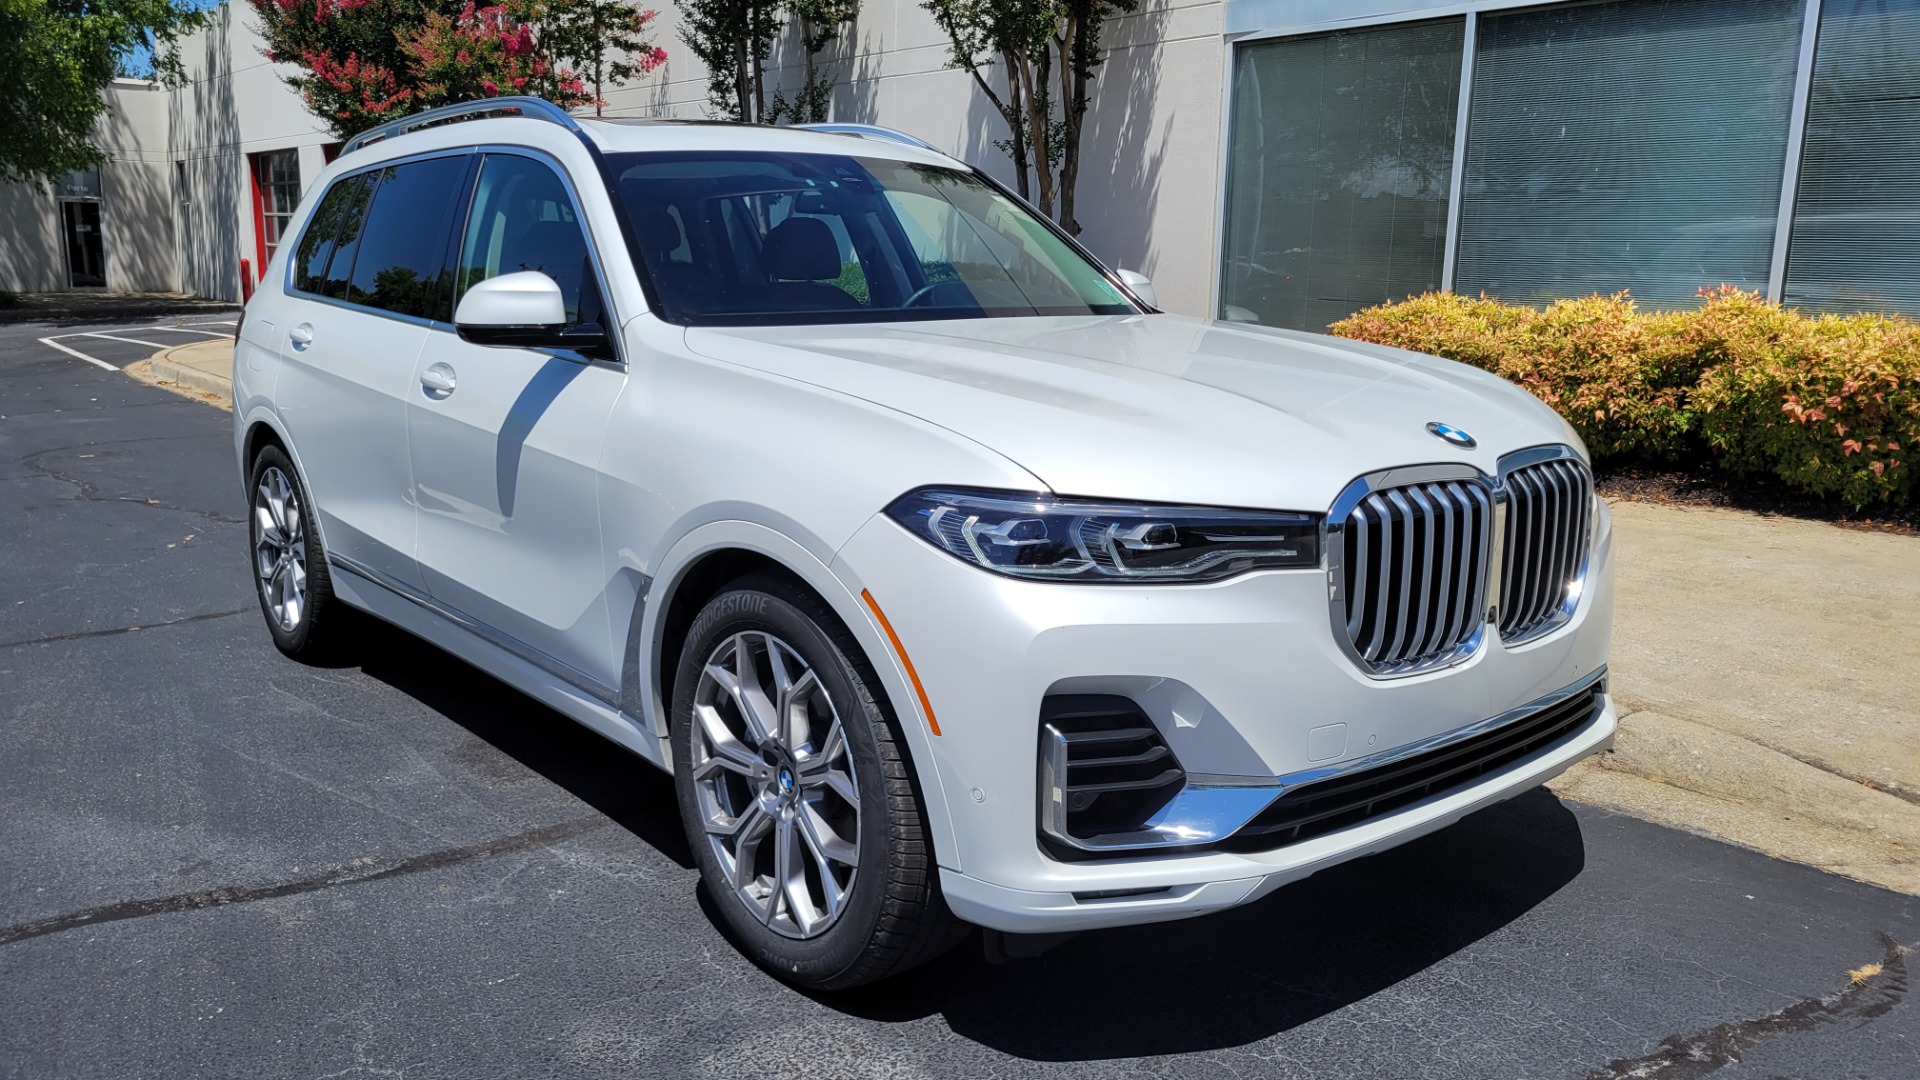 Used 2019 BMW X7 XDRIVE40I PREMIUM / NAV / HUD / PARK ASST PLUS / REMOTE START / 3D VIEW for sale $62,995 at Formula Imports in Charlotte NC 28227 5